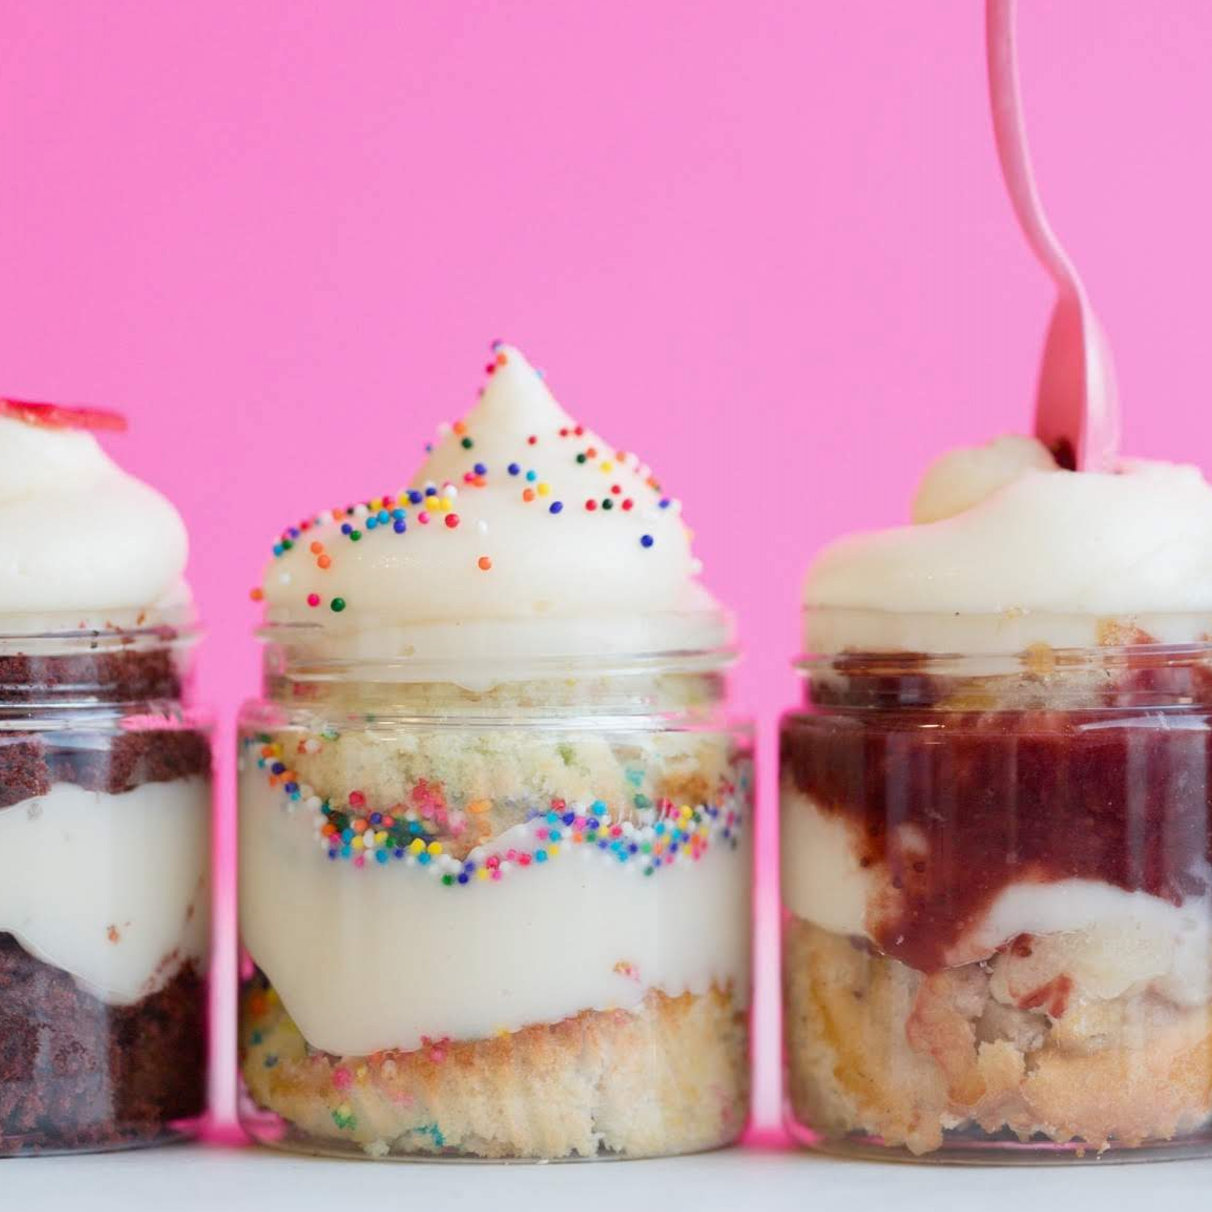 The best cake gift you can give anyone cupcakes in a jar dreamy creations